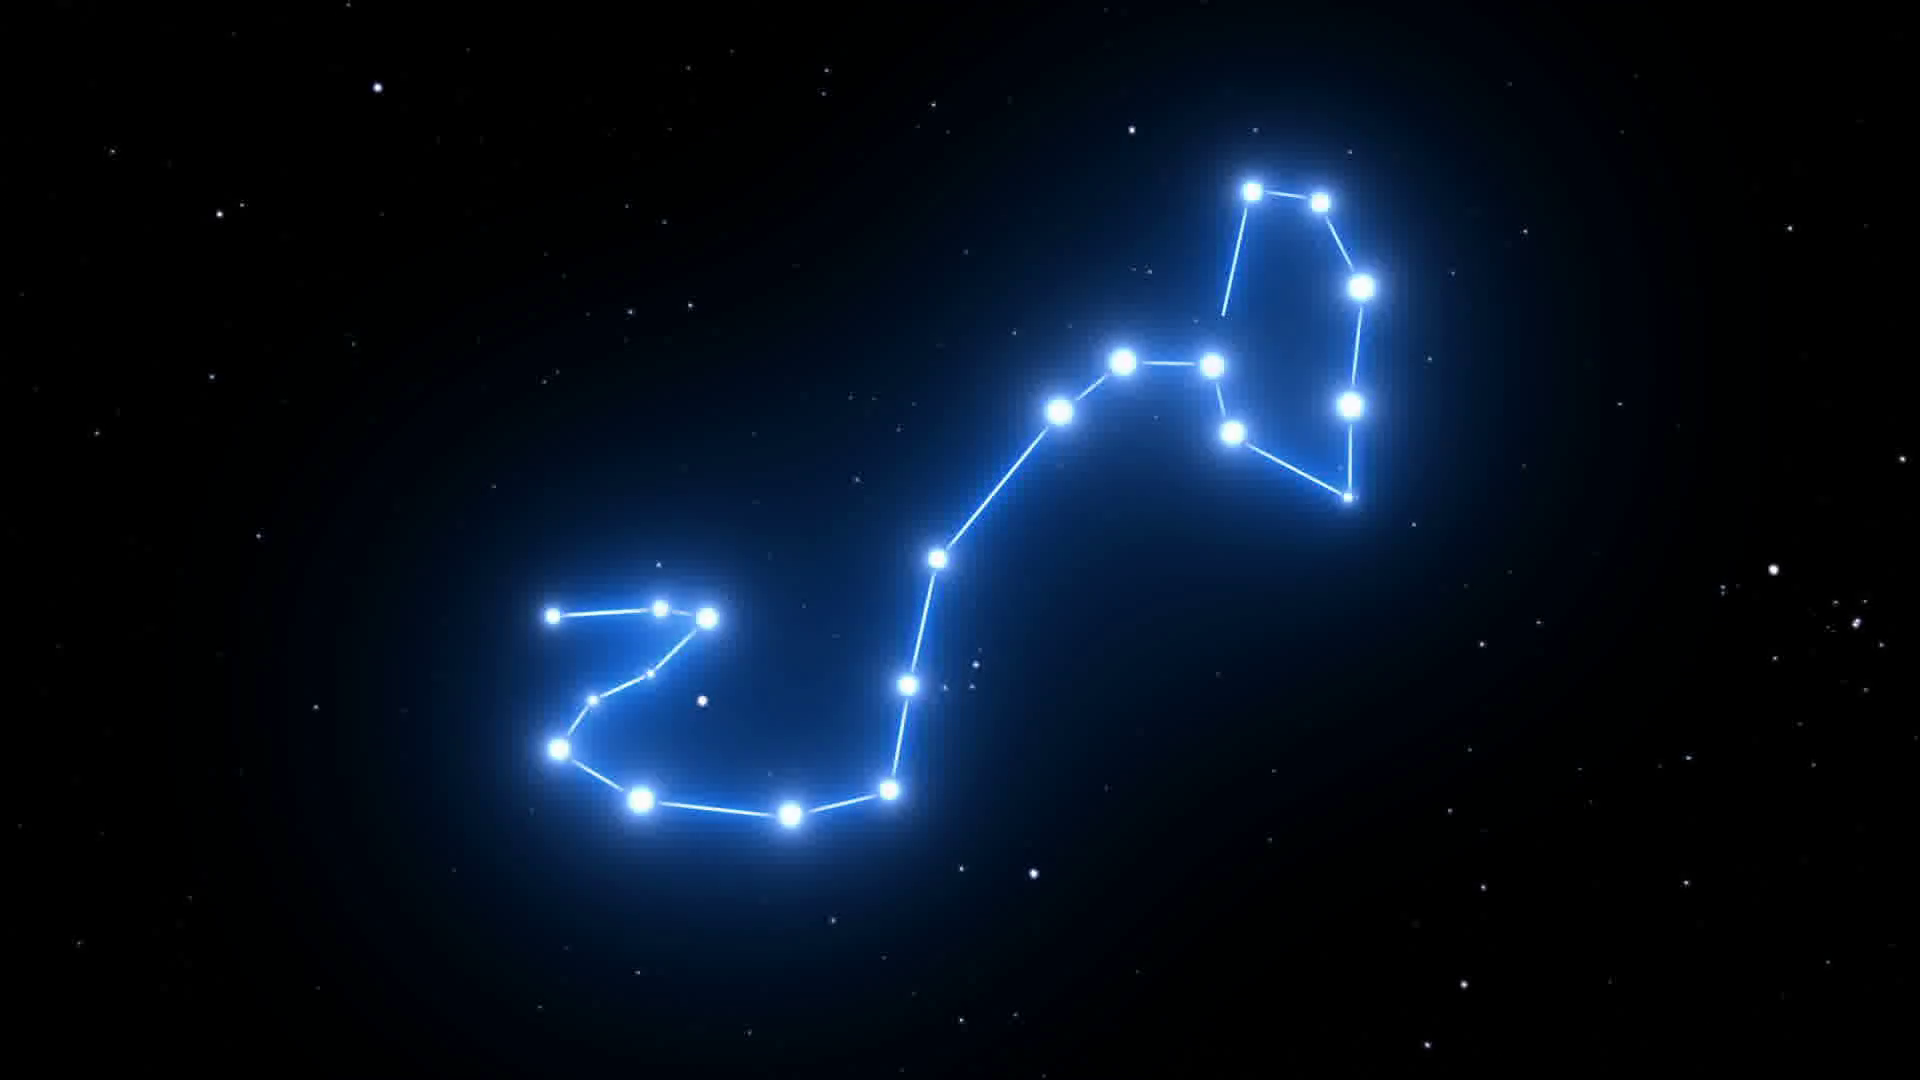 If You Pass This Quiz WIth Flying Colors, Then You Definitely Know Enough About Science Scorpius constellation